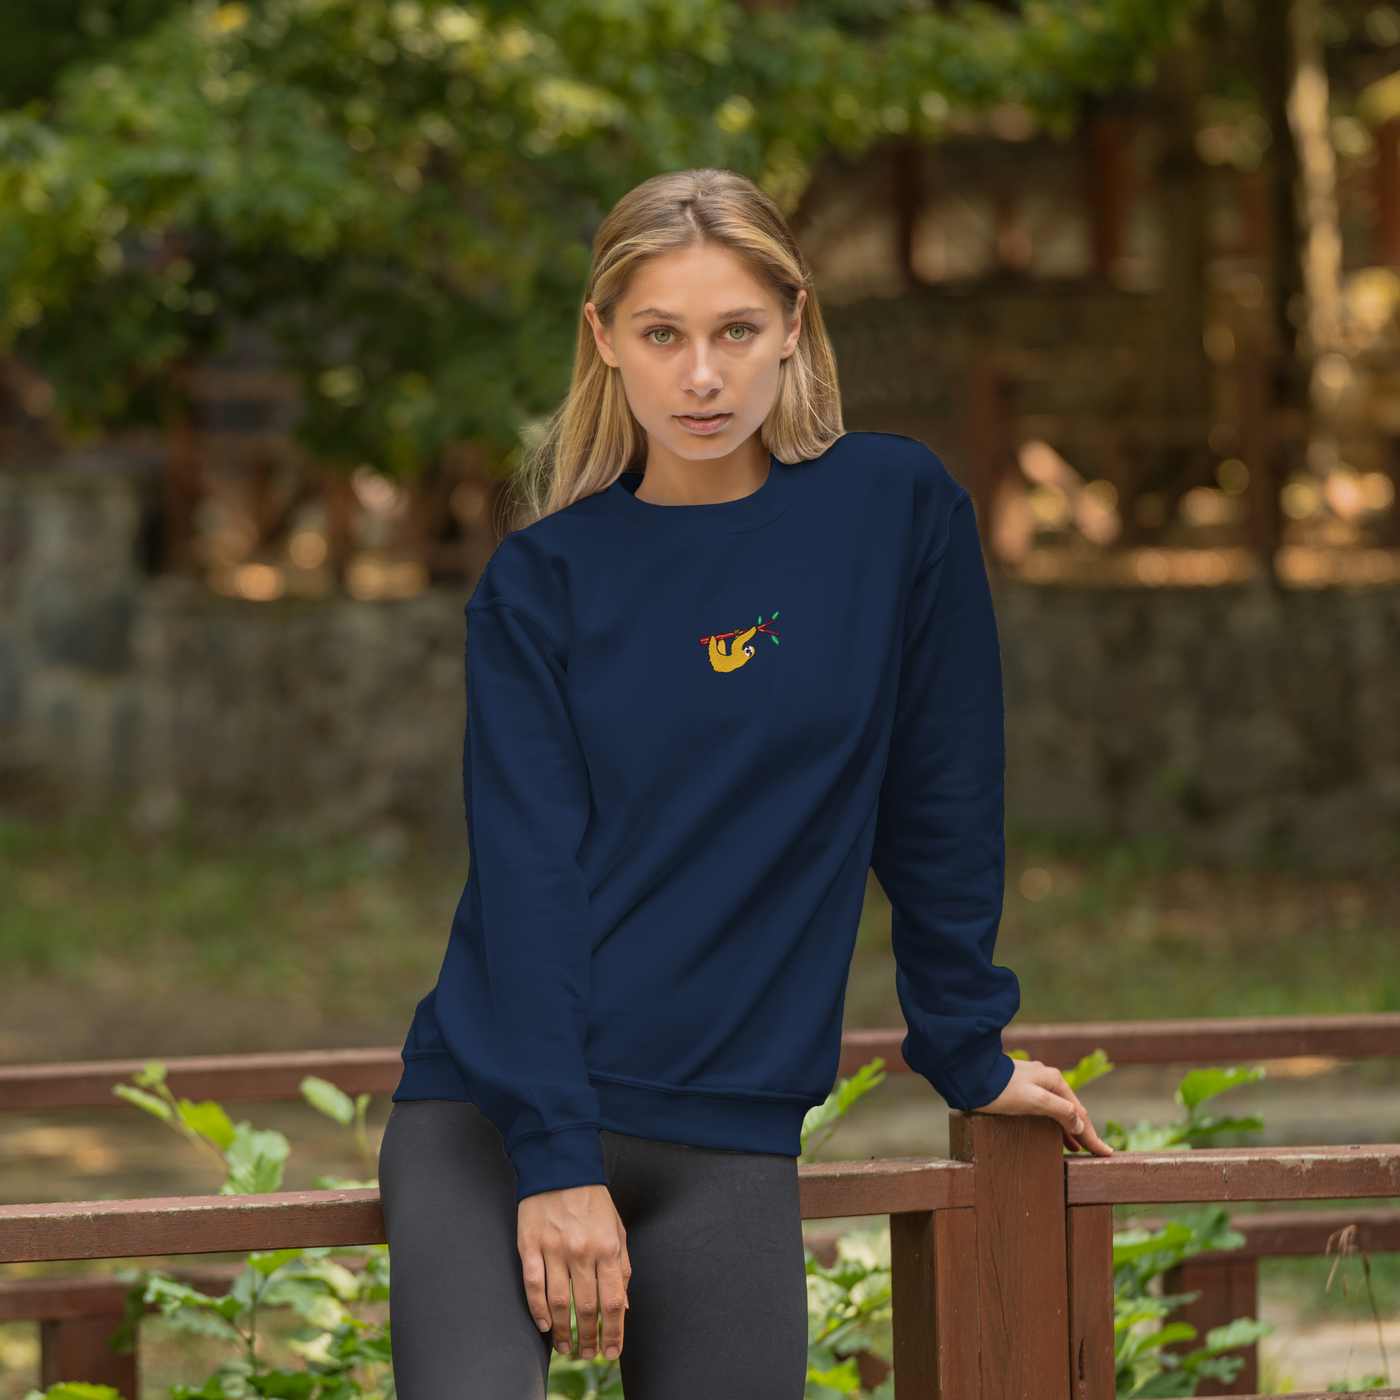 Bobby's Planet Women's Embroidered Sloth Sweatshirt from South American Amazon Animals Collection in Navy Color#color_navy